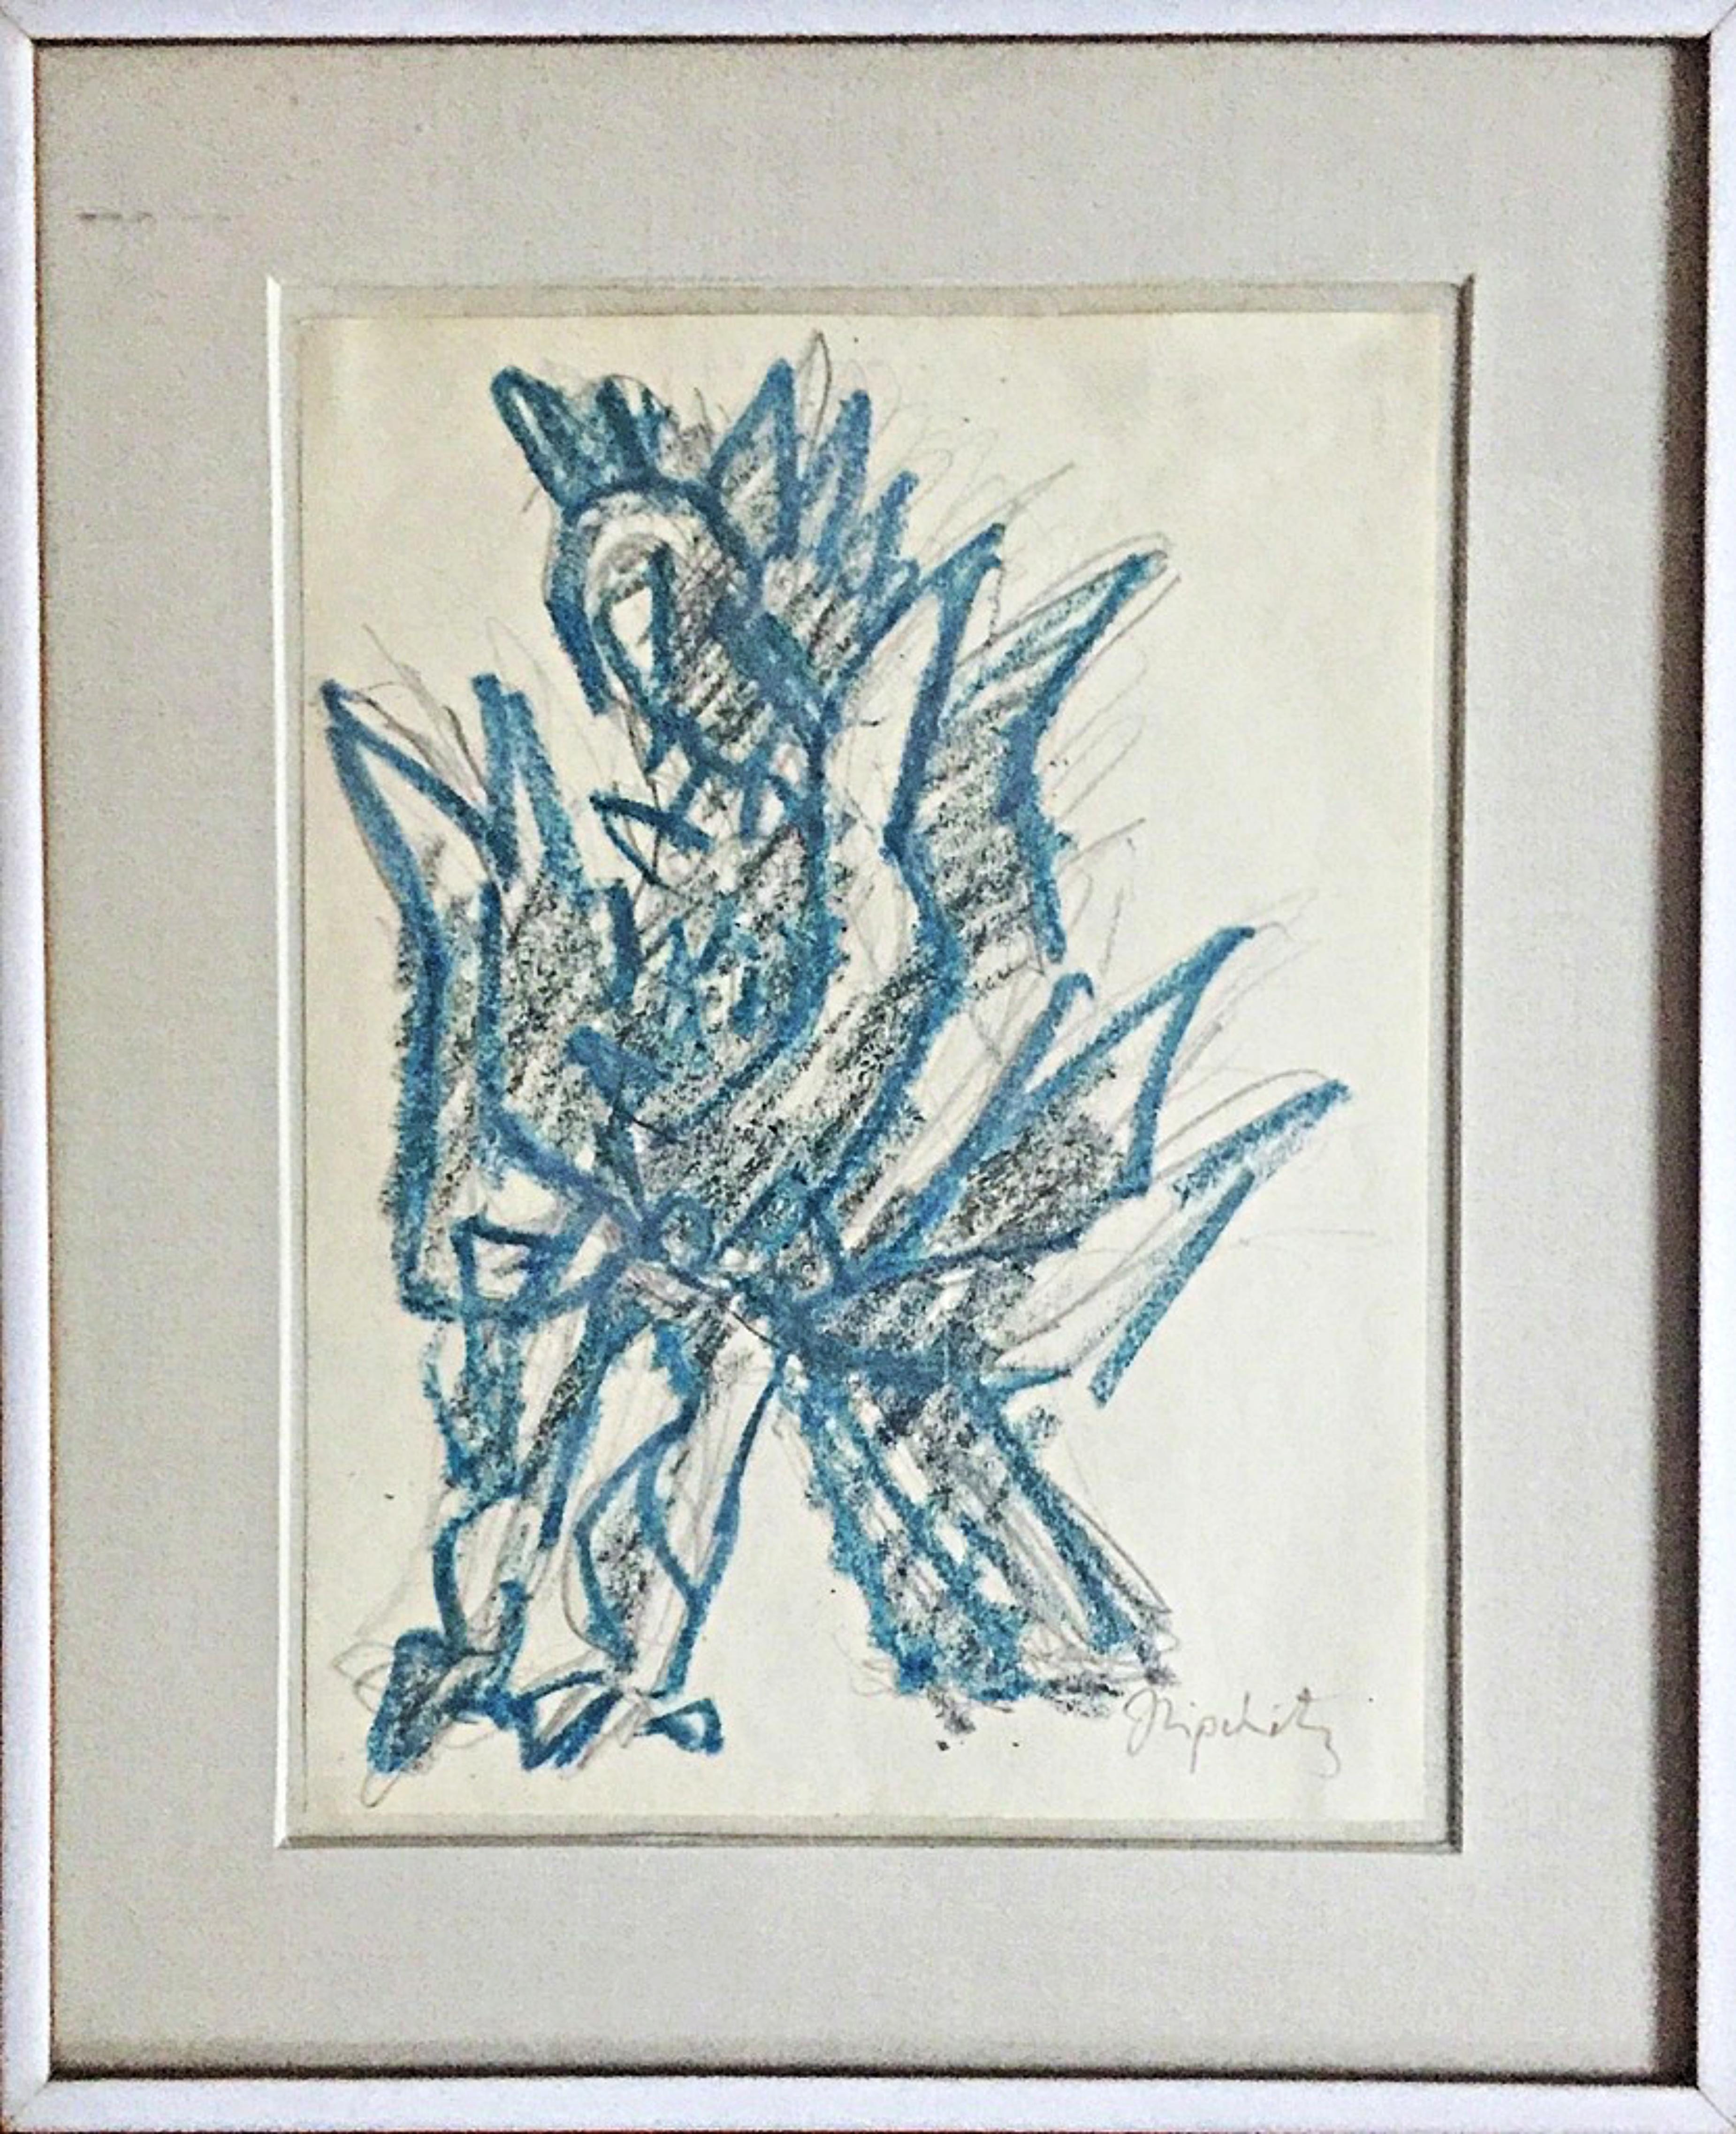 Study for a Lesson from a Disaster, original drawing by famed modernist sculptor - Modern Mixed Media Art by Jacques Lipchitz